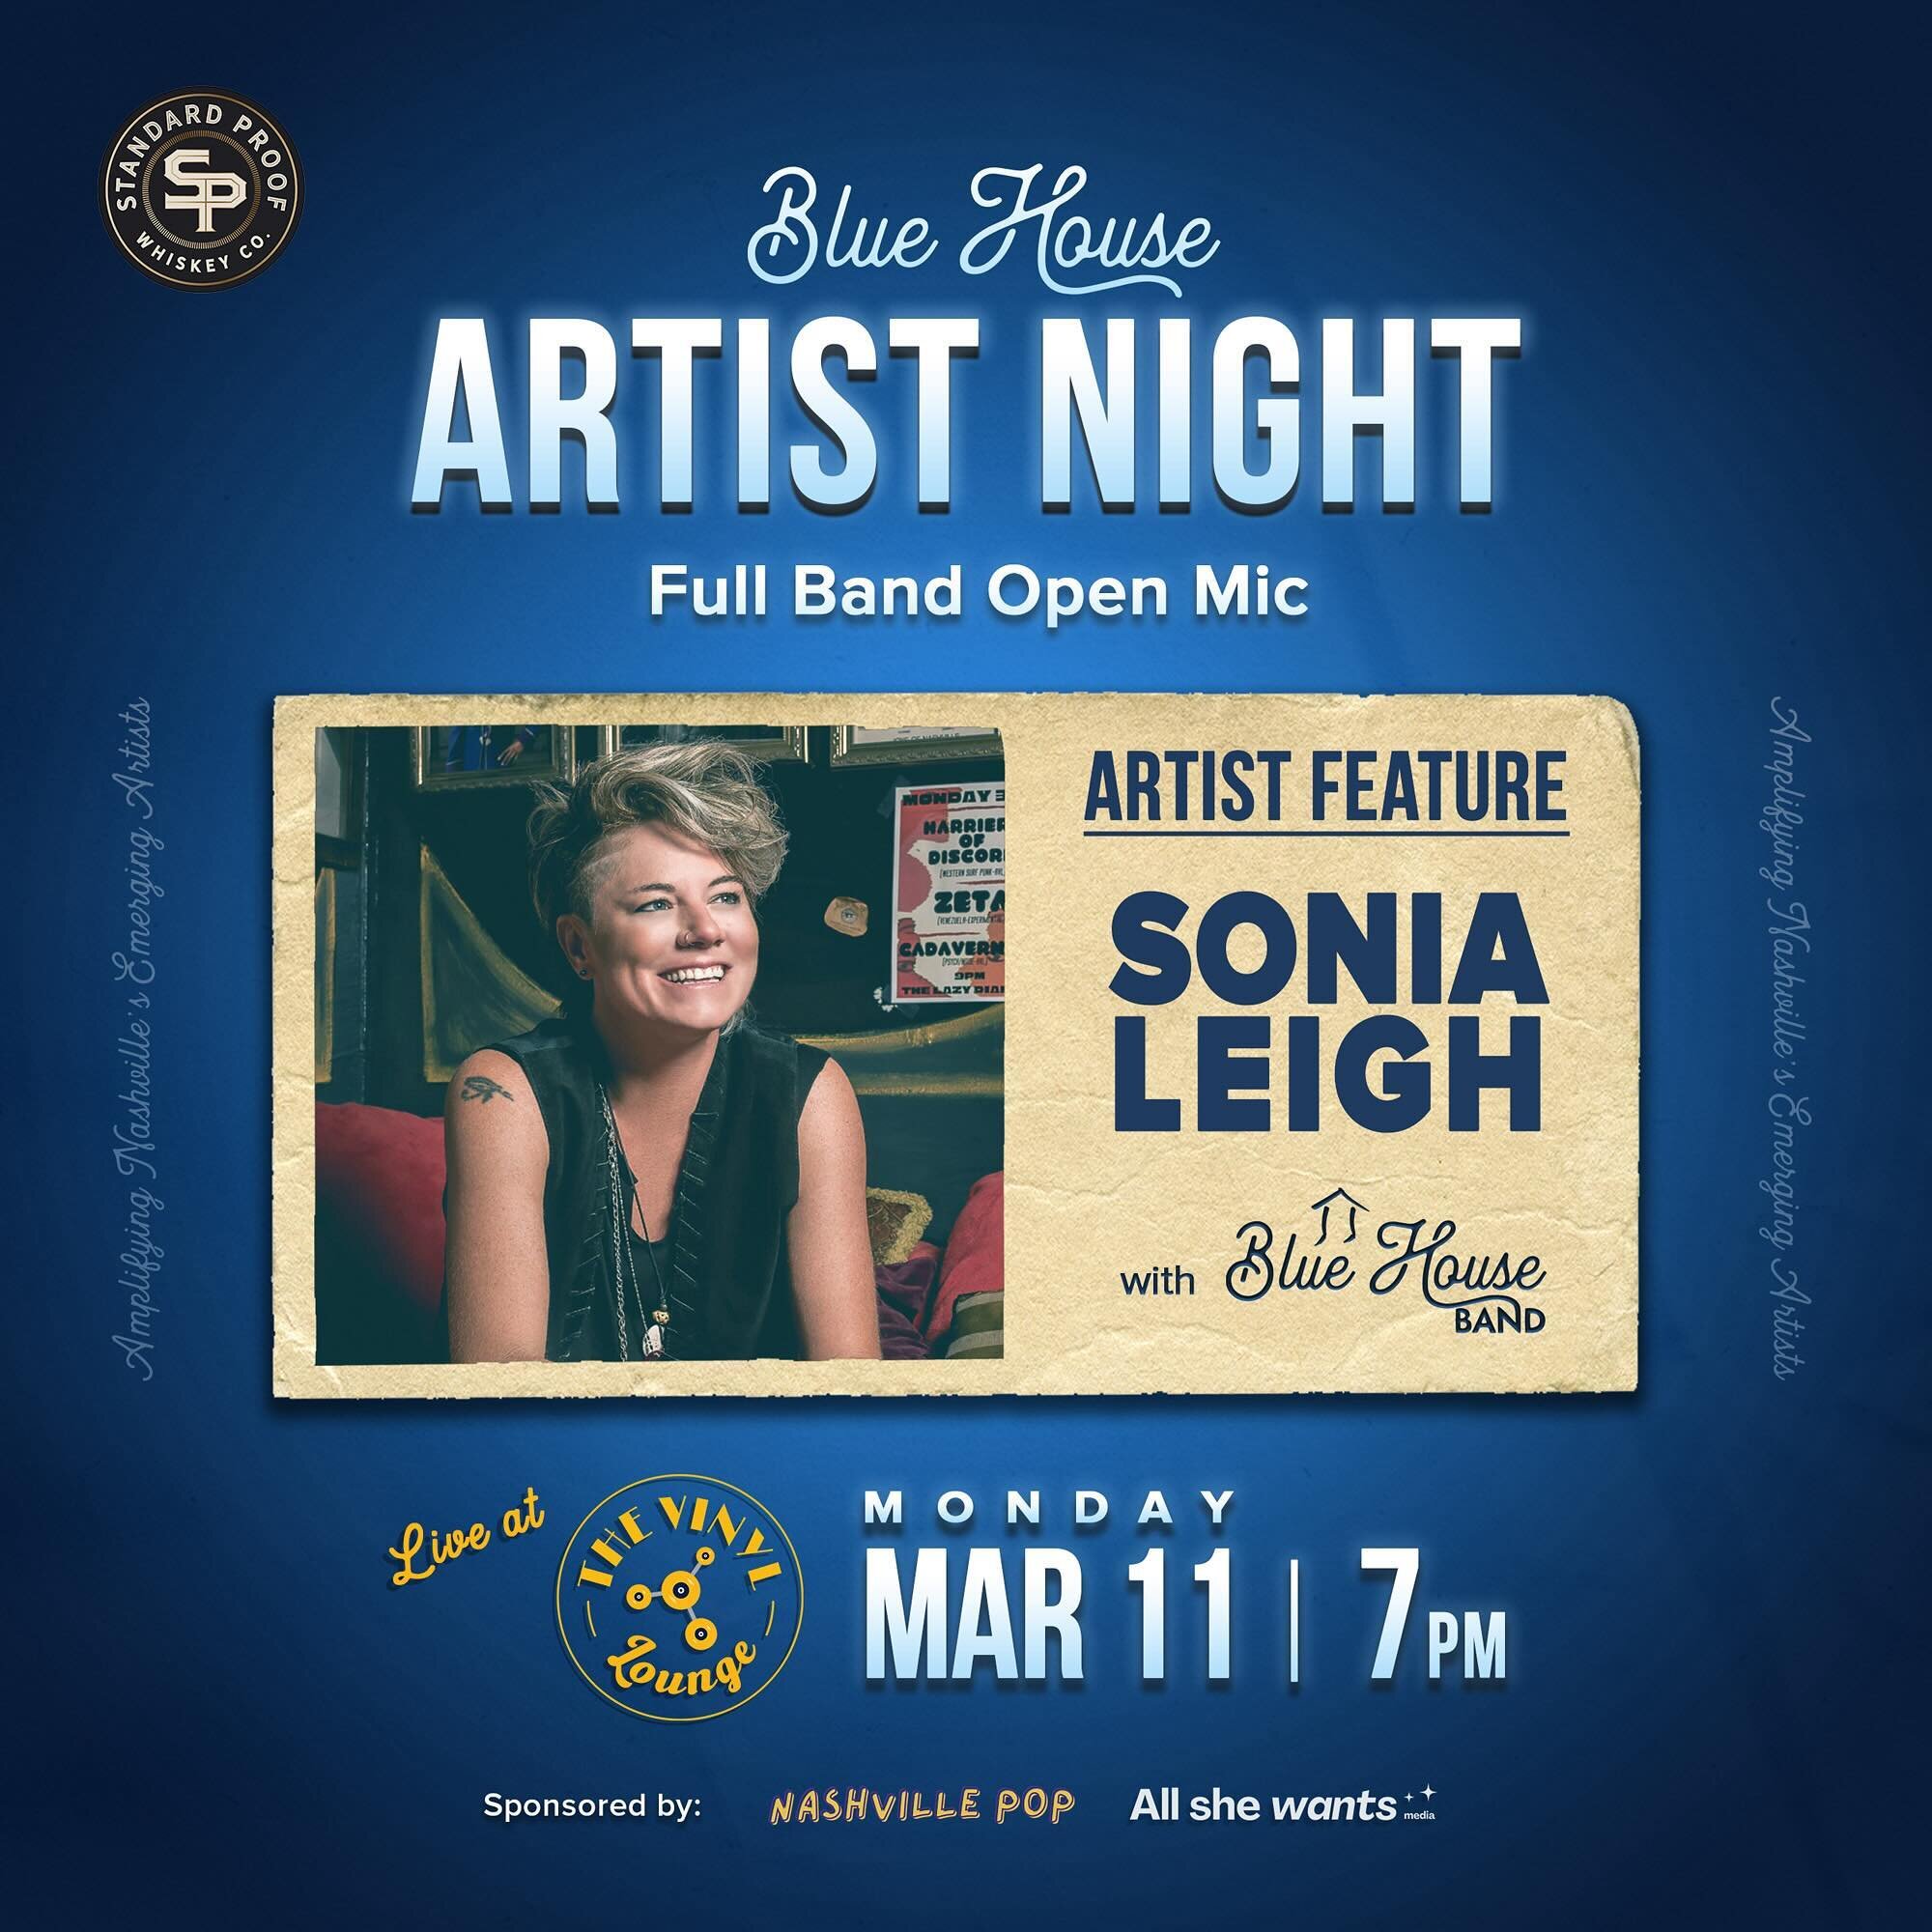 This week we are featuring an incredible talent: hit songwriter @sonialeigh. Sonia spans genres of Americana, Rock and Pop. Her single &ldquo;My Name is Money&rdquo; landed #36 on Billboard Hot 100 and she wrote two #1&rsquo;s with Zac Brown Band! He